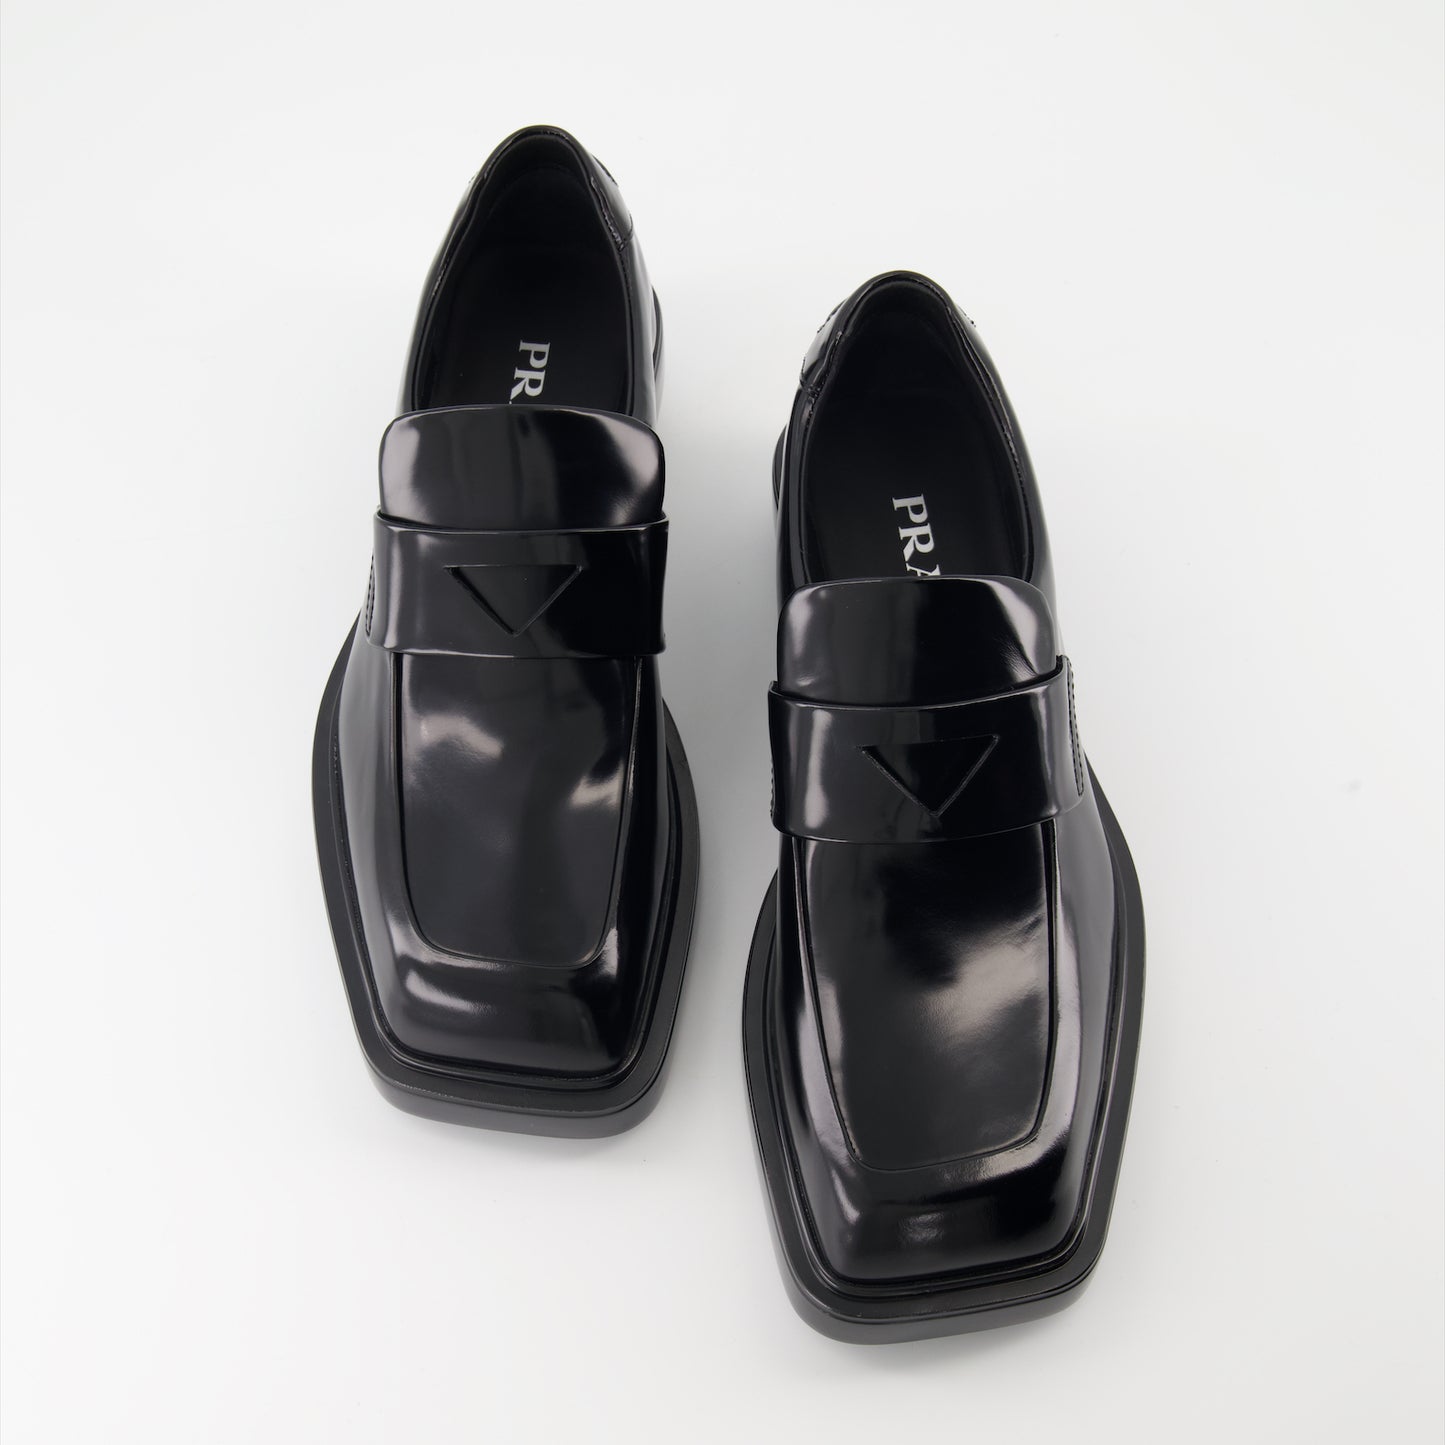 Brushed leather loafers